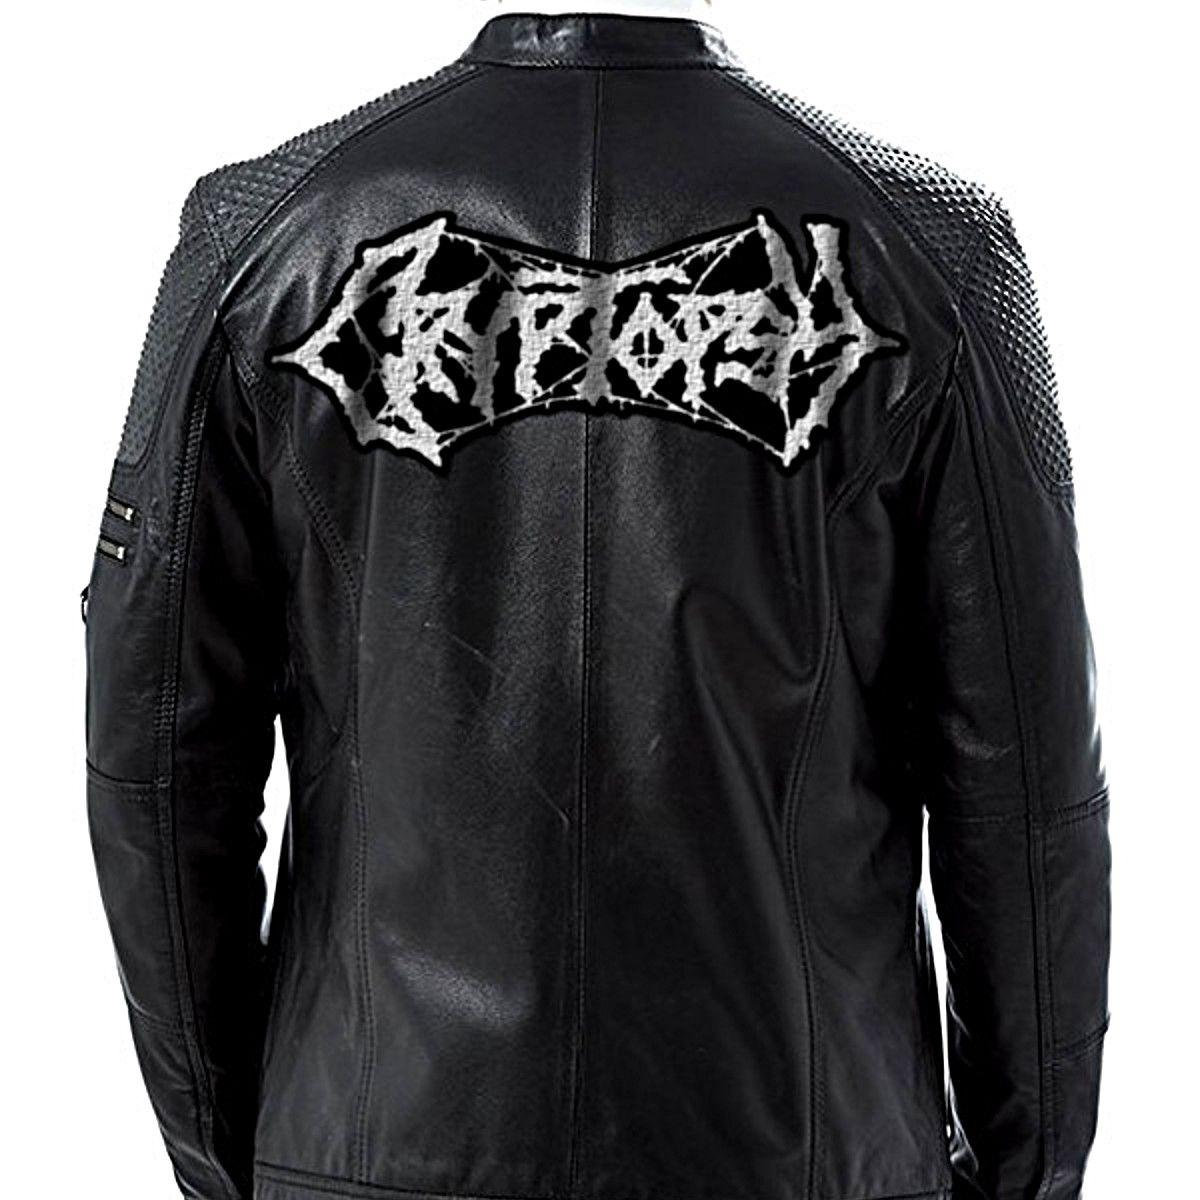 Cryptopsy Logo - Cryptopsy Logo Patched Geniune Leather Jacket, Death Metal